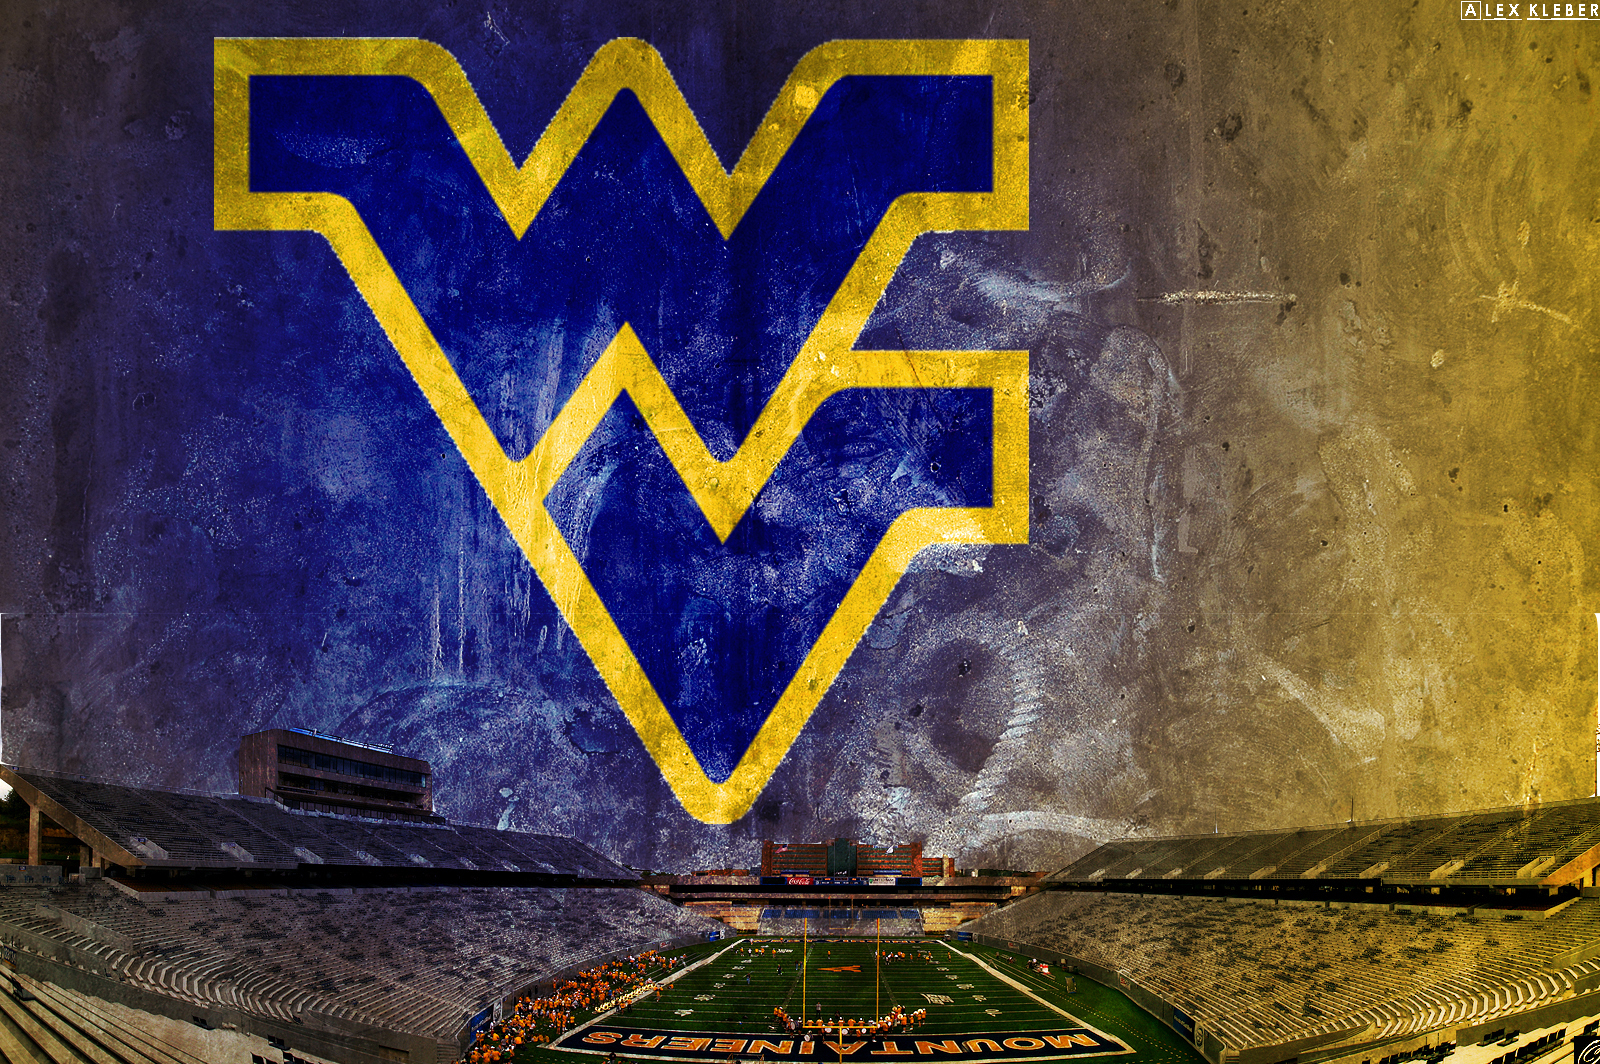 Go Wvu Publish With Glogster